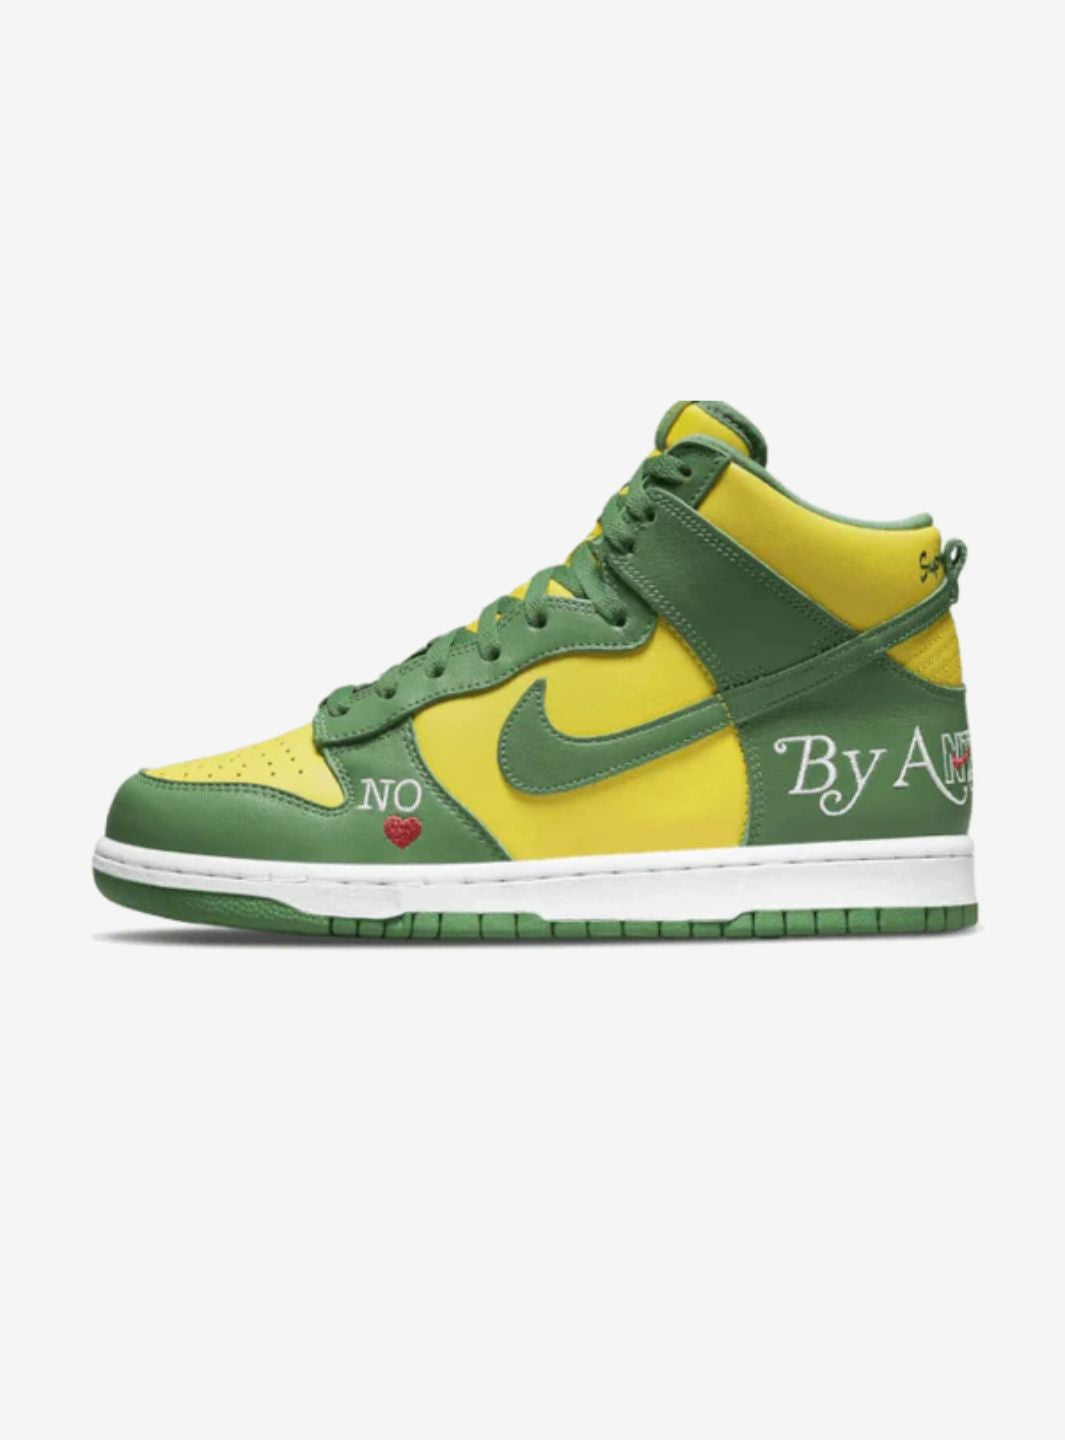 Nike SB Dunk High Supreme By Any Means Brazil - DN3741-700 | ResellZone